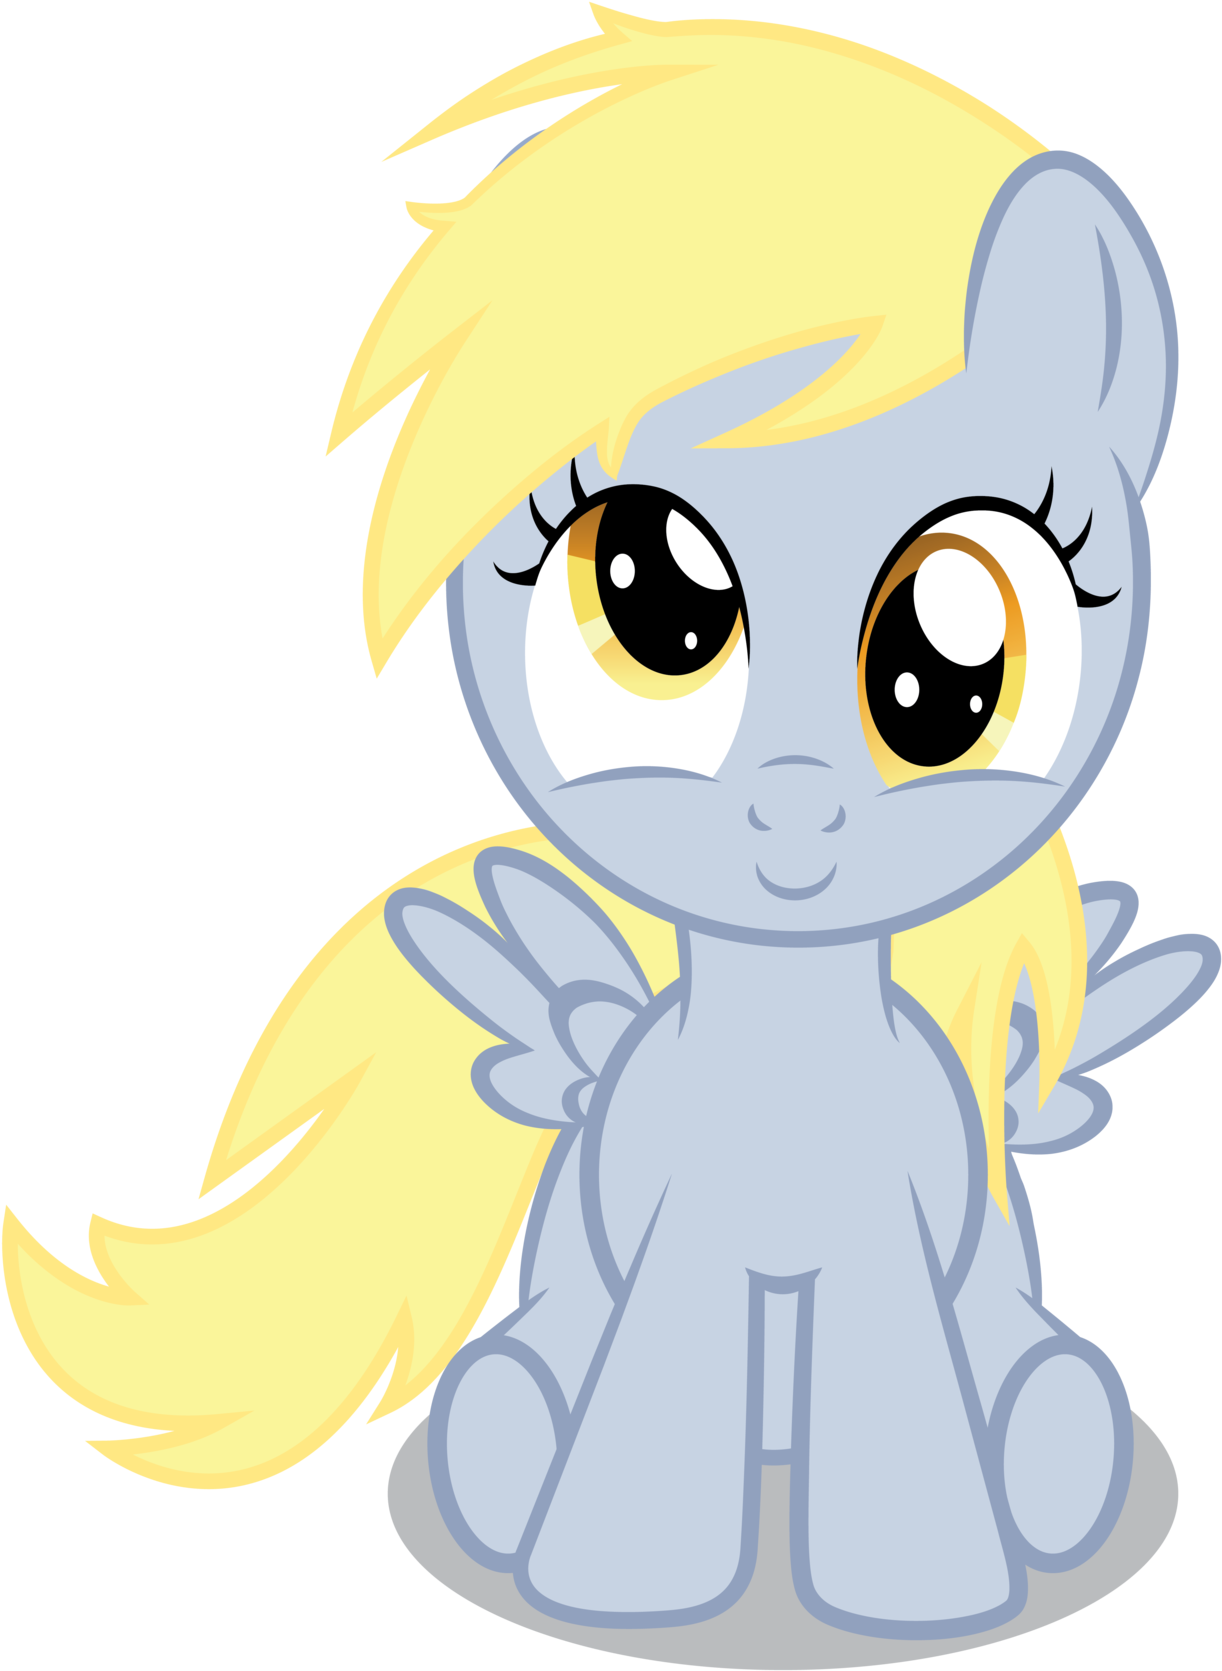 Derpy Hooves Images Filly Derpy Hooves Hd Wallpaper - 마이 리틀 포니 레인보우 대쉬 Clipart (1280x1703), Png Download